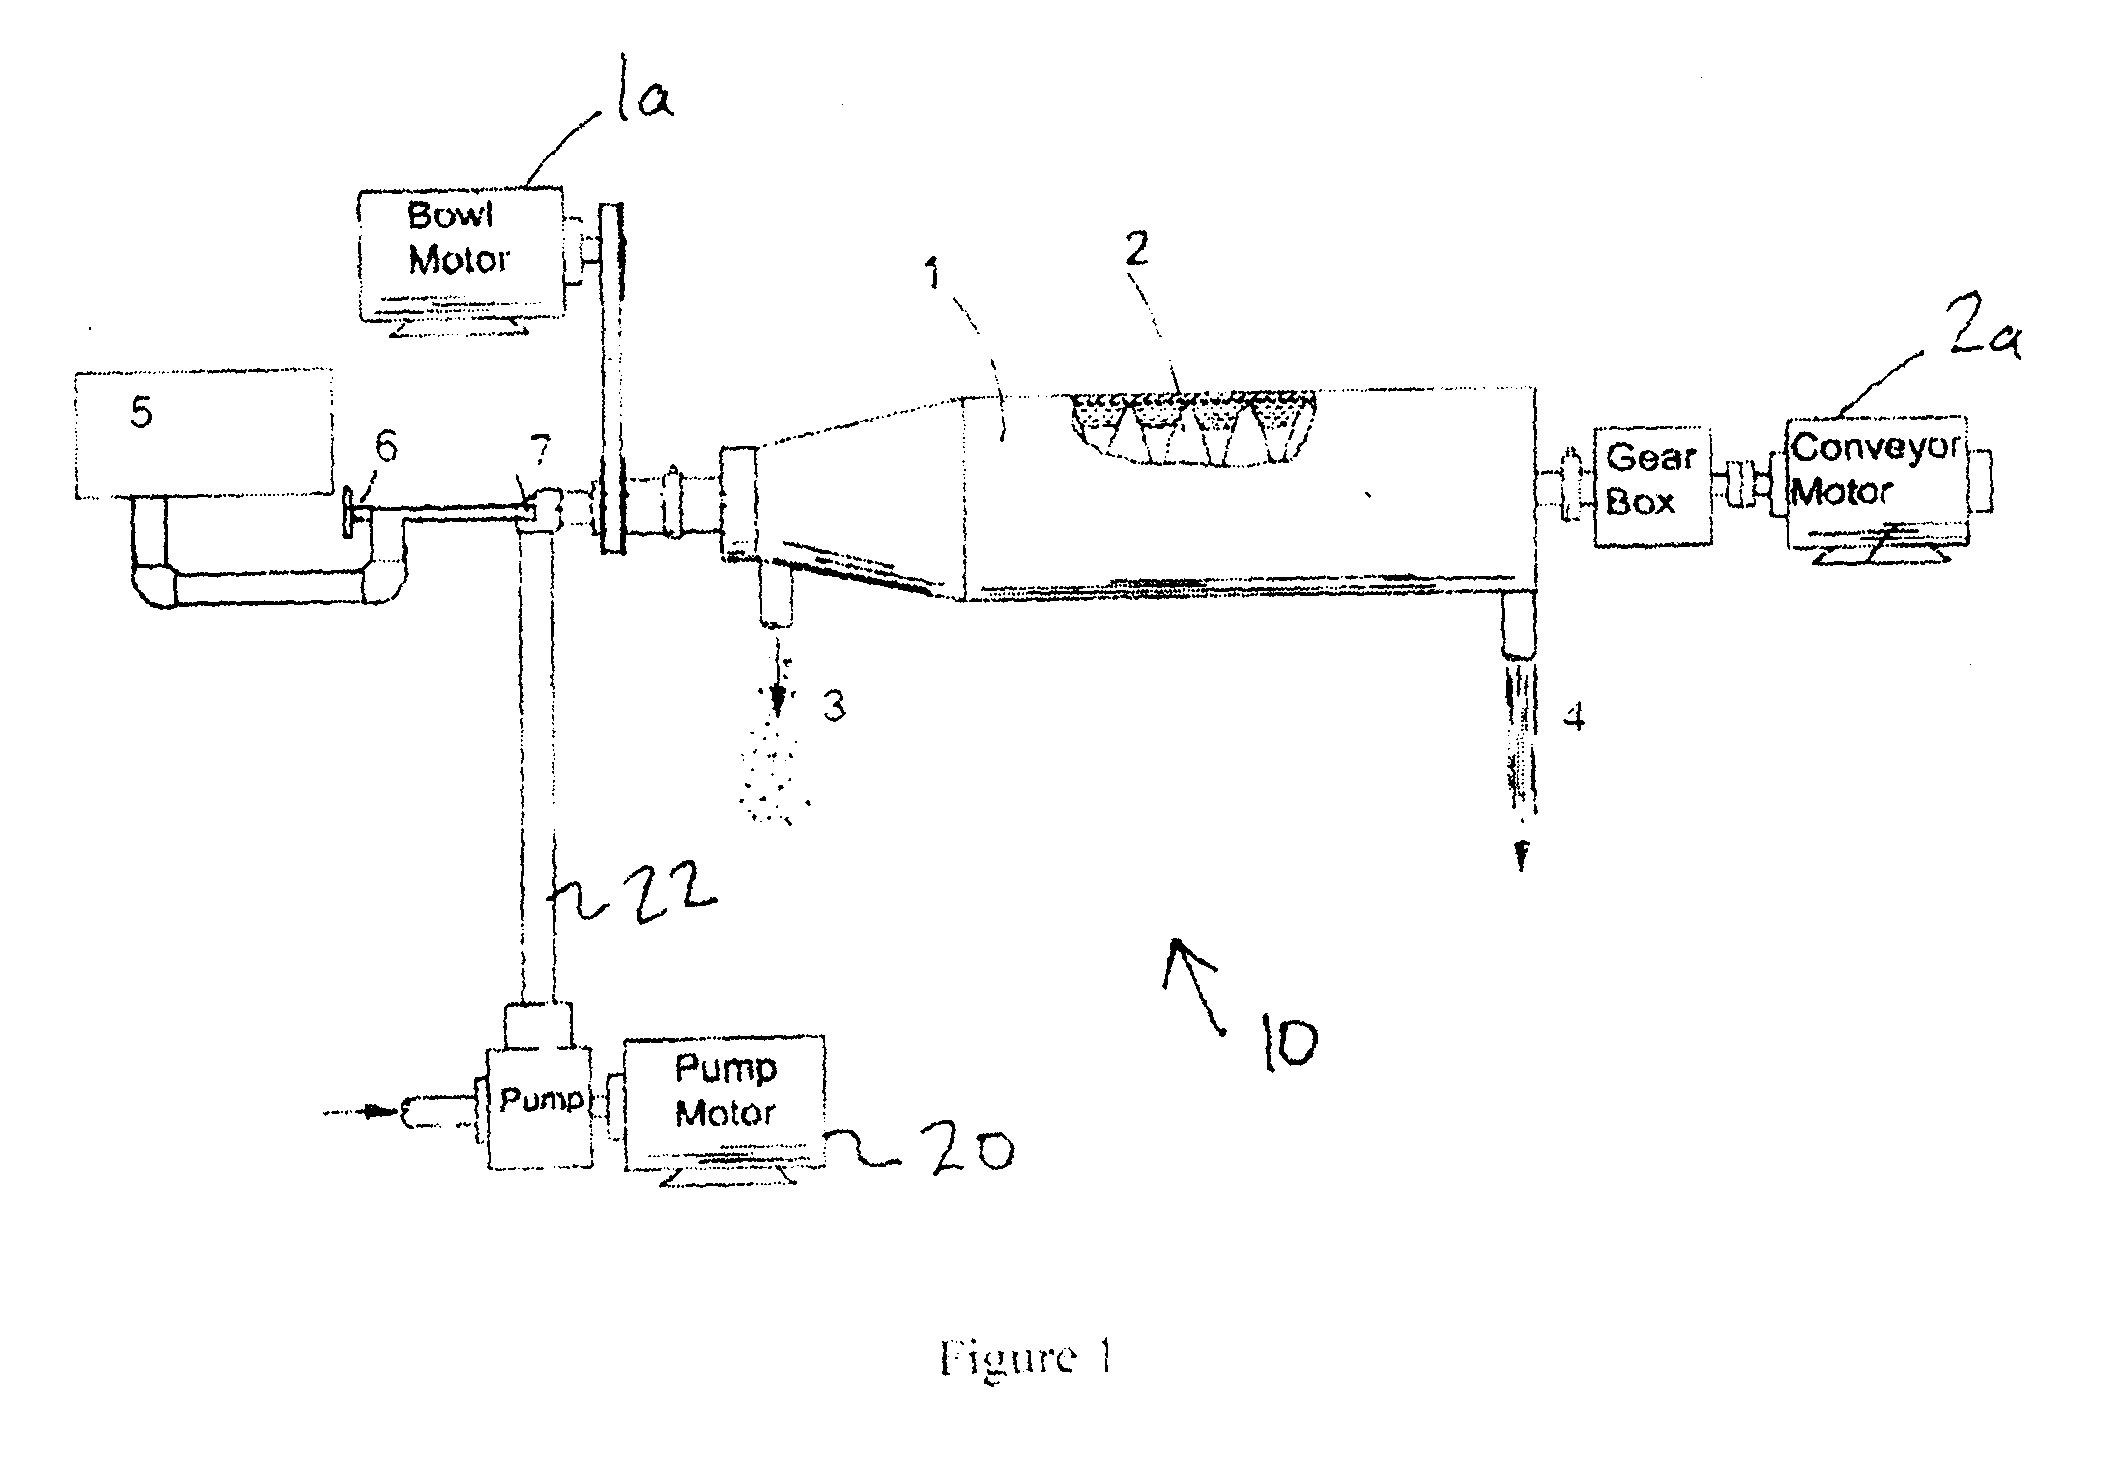 System and Method for Improving the Separation of Entrained Solids from a Solution Within a Centrifuge